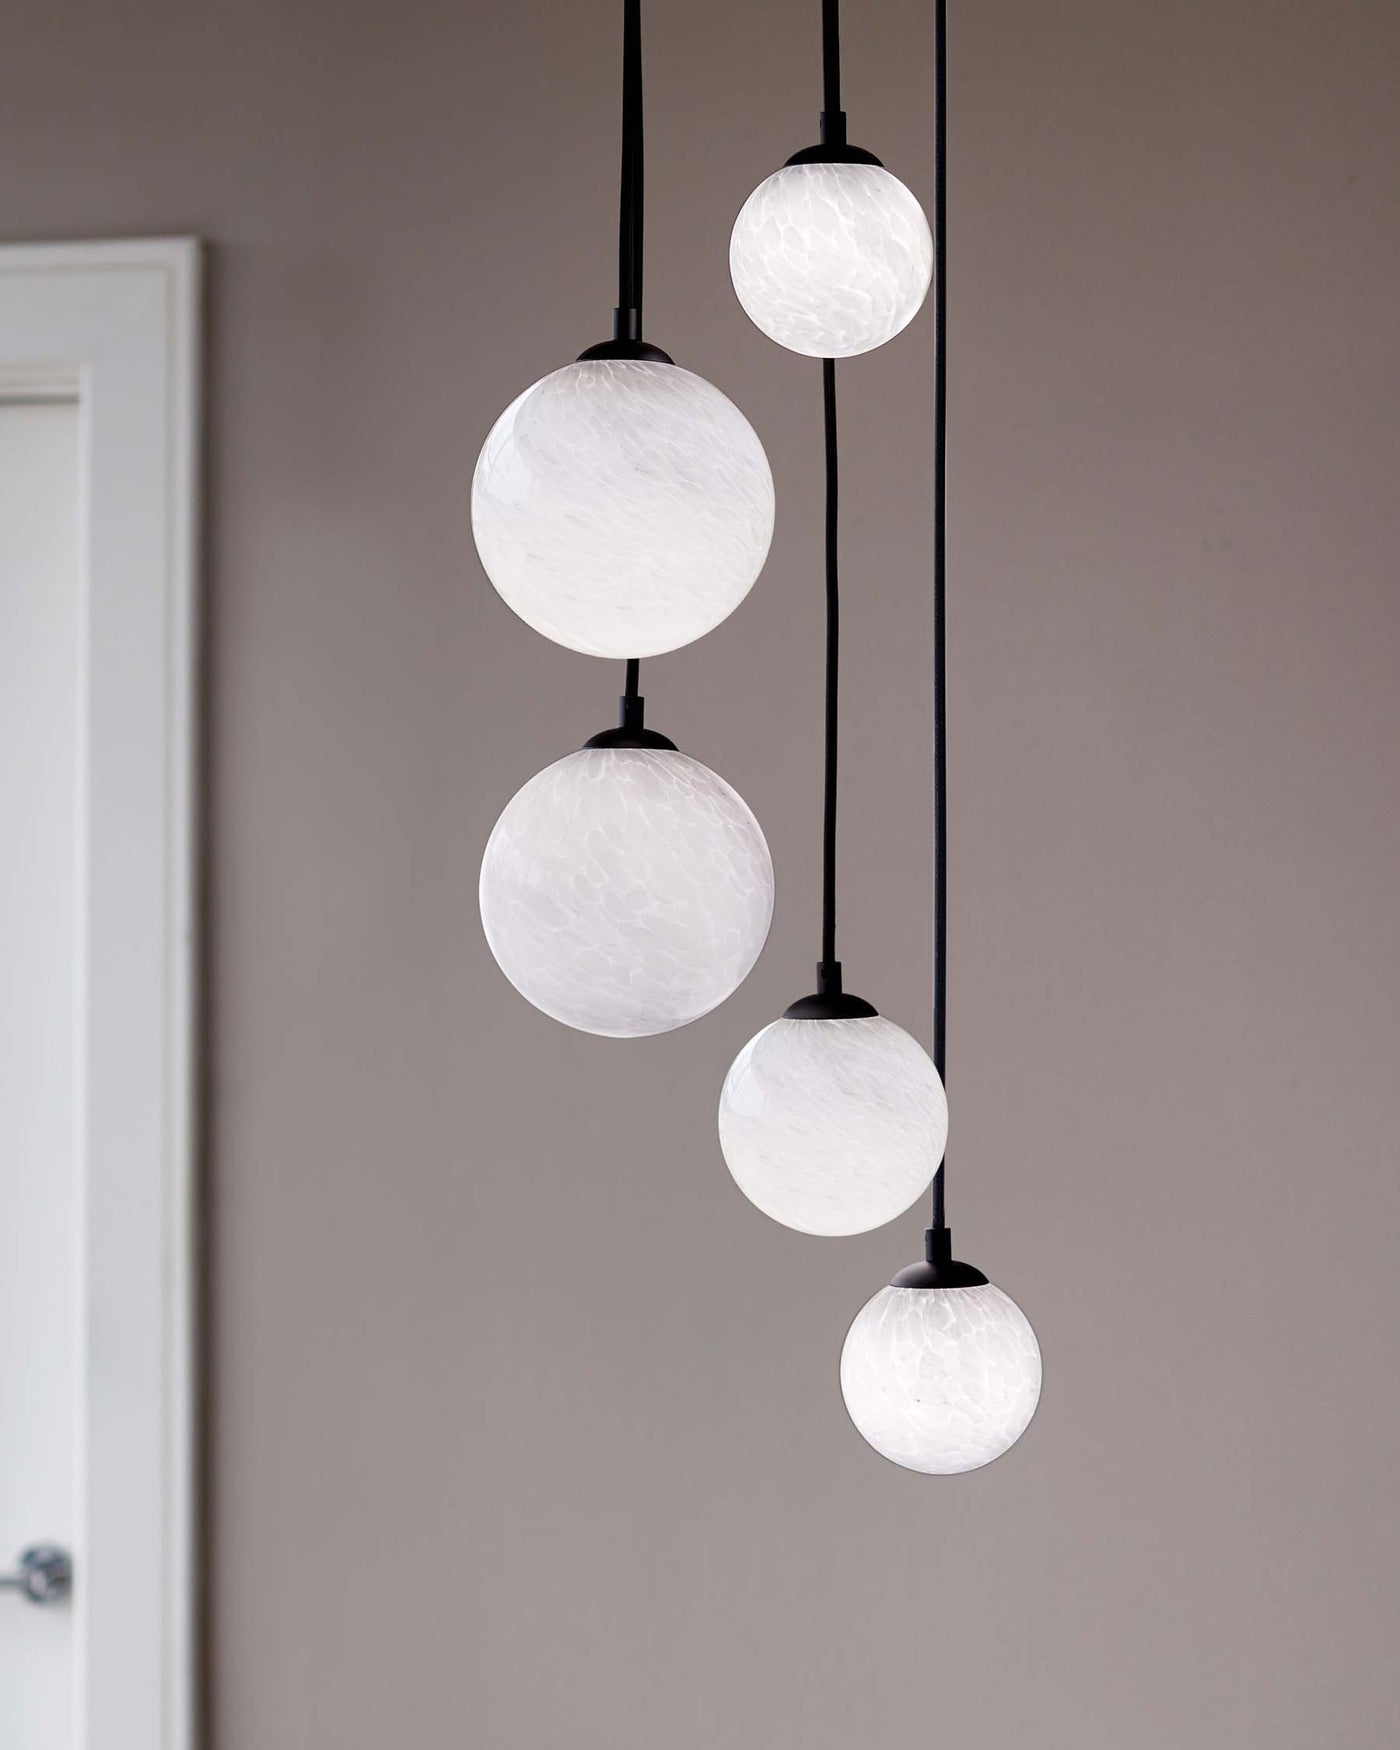 A modern pendant light fixture with five spherical white frosted glass shades of varying sizes, each suspended by a simple black cord, creating an elegant vertical cascade of ambient lighting.